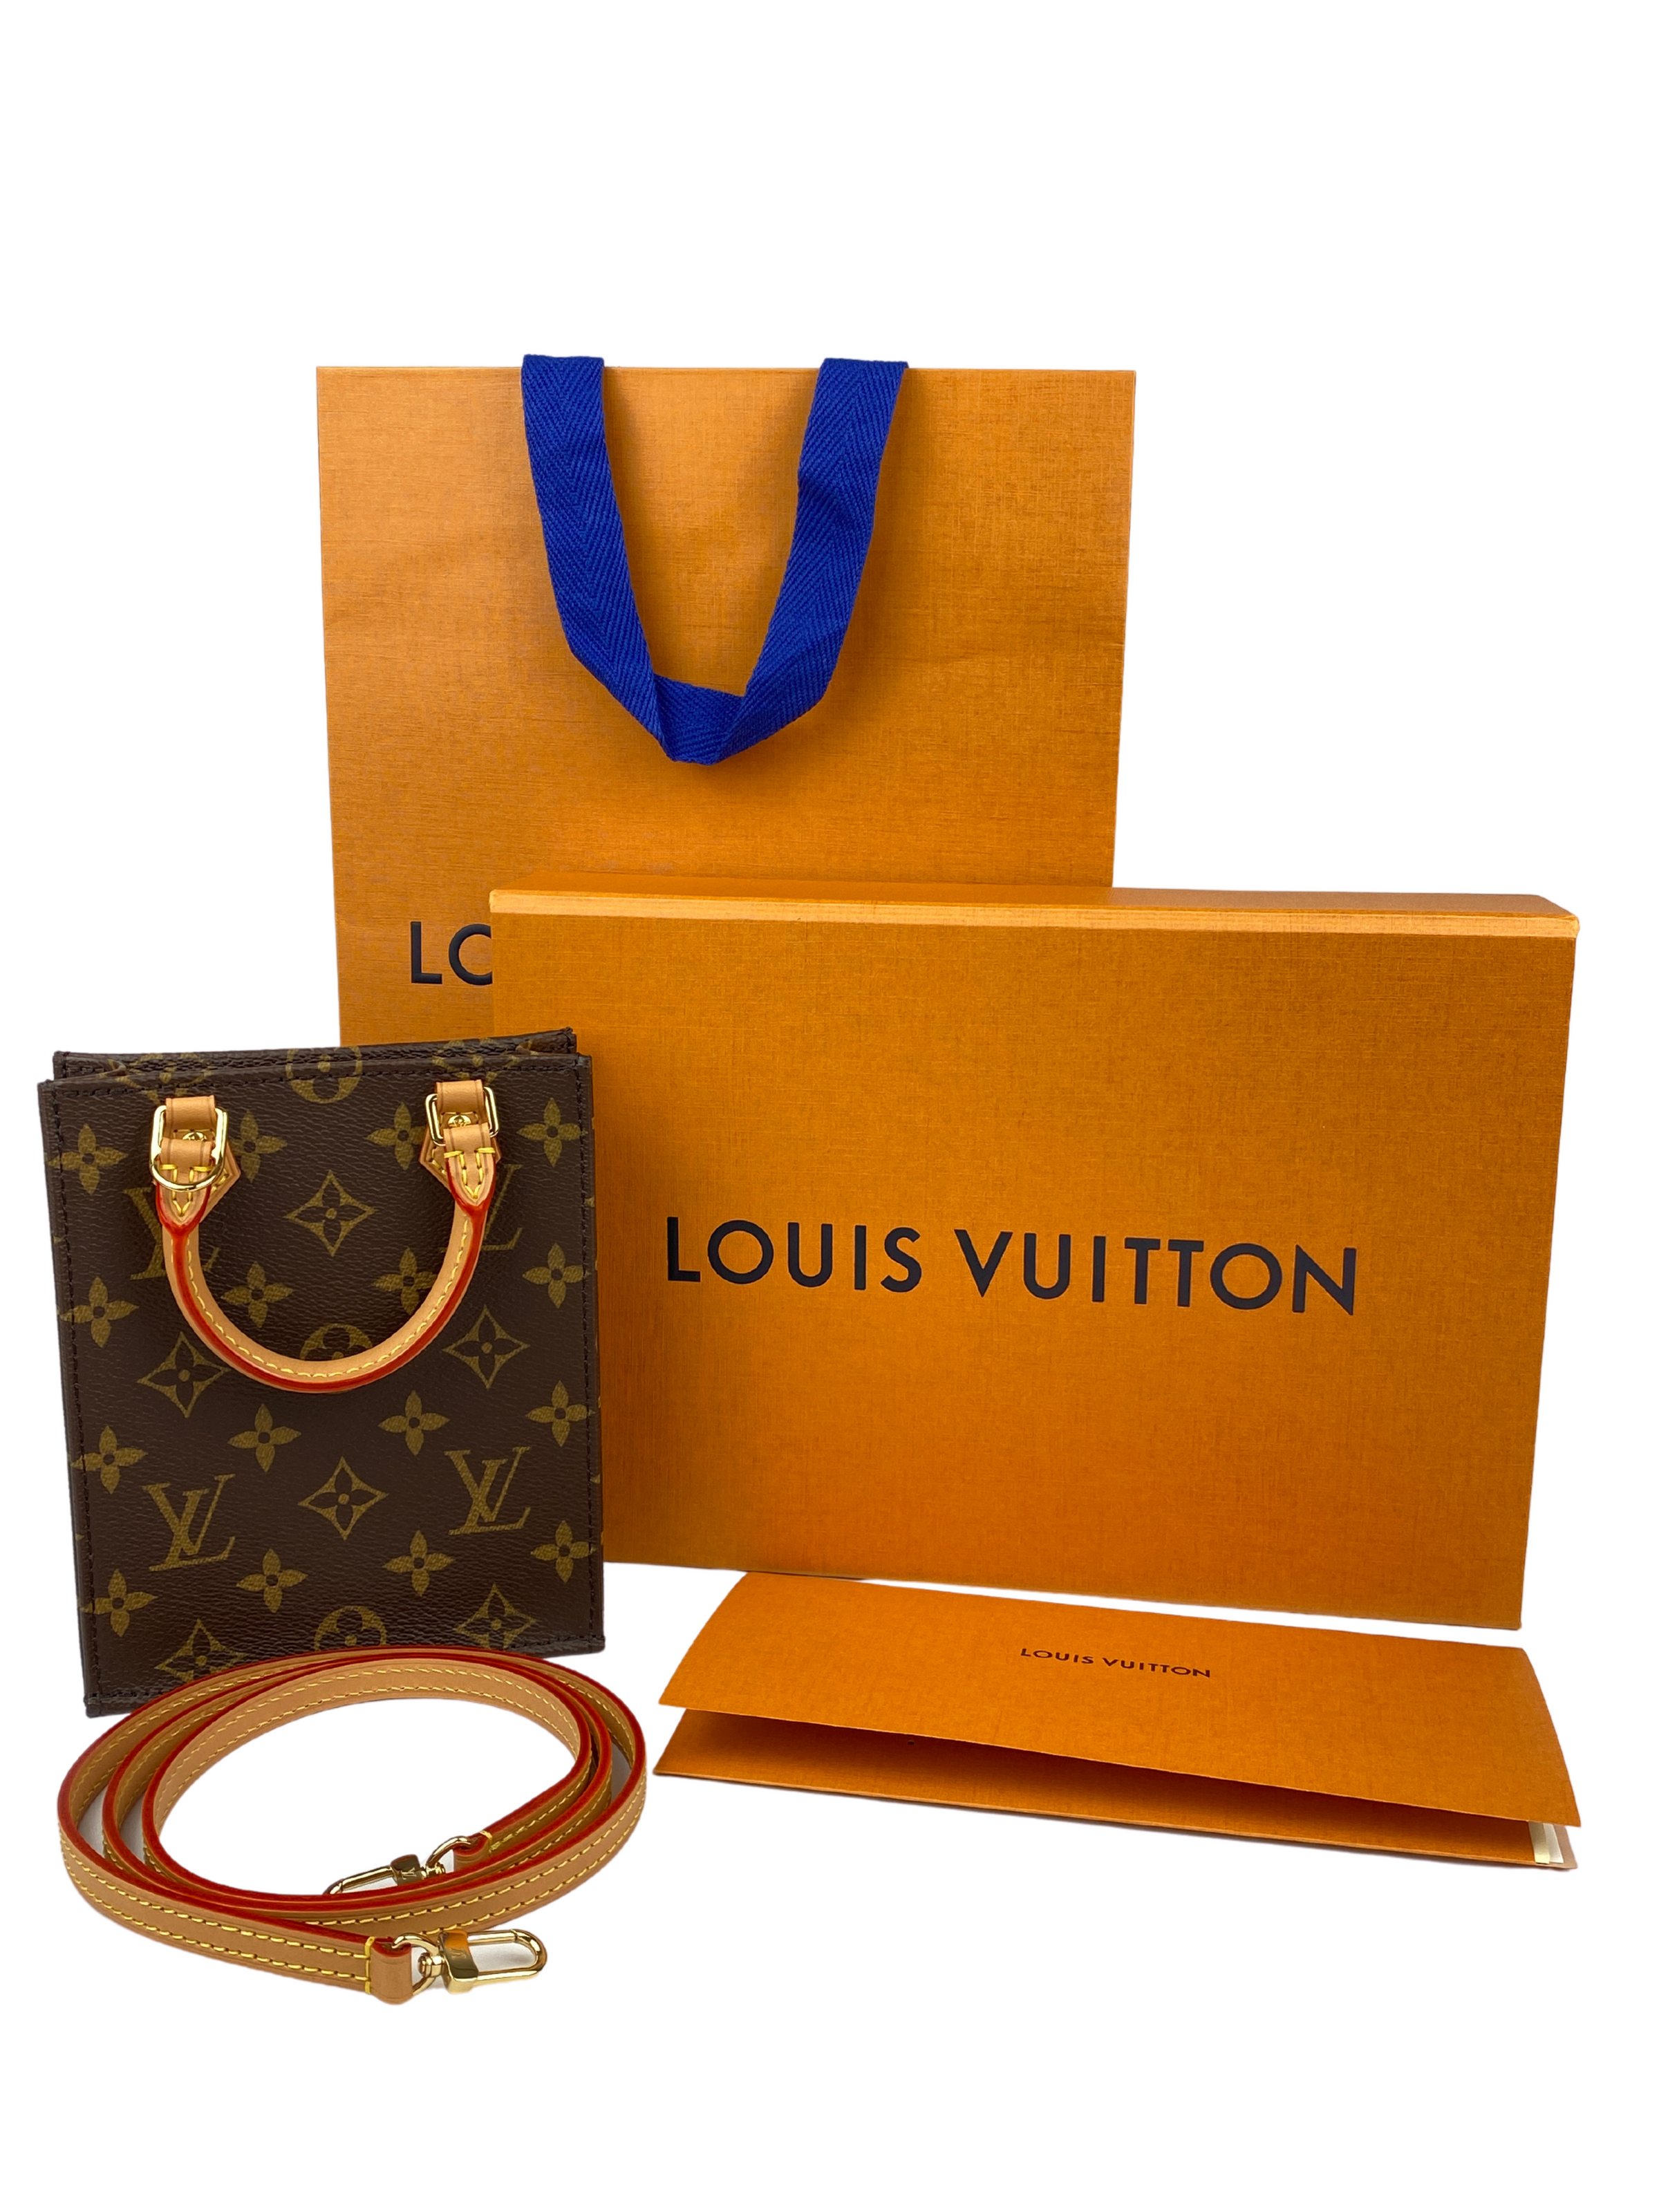 Lot Of 4 AUTHENTIC LOUIS VUITTON SHOPPING TOTE BAG Paper Bag